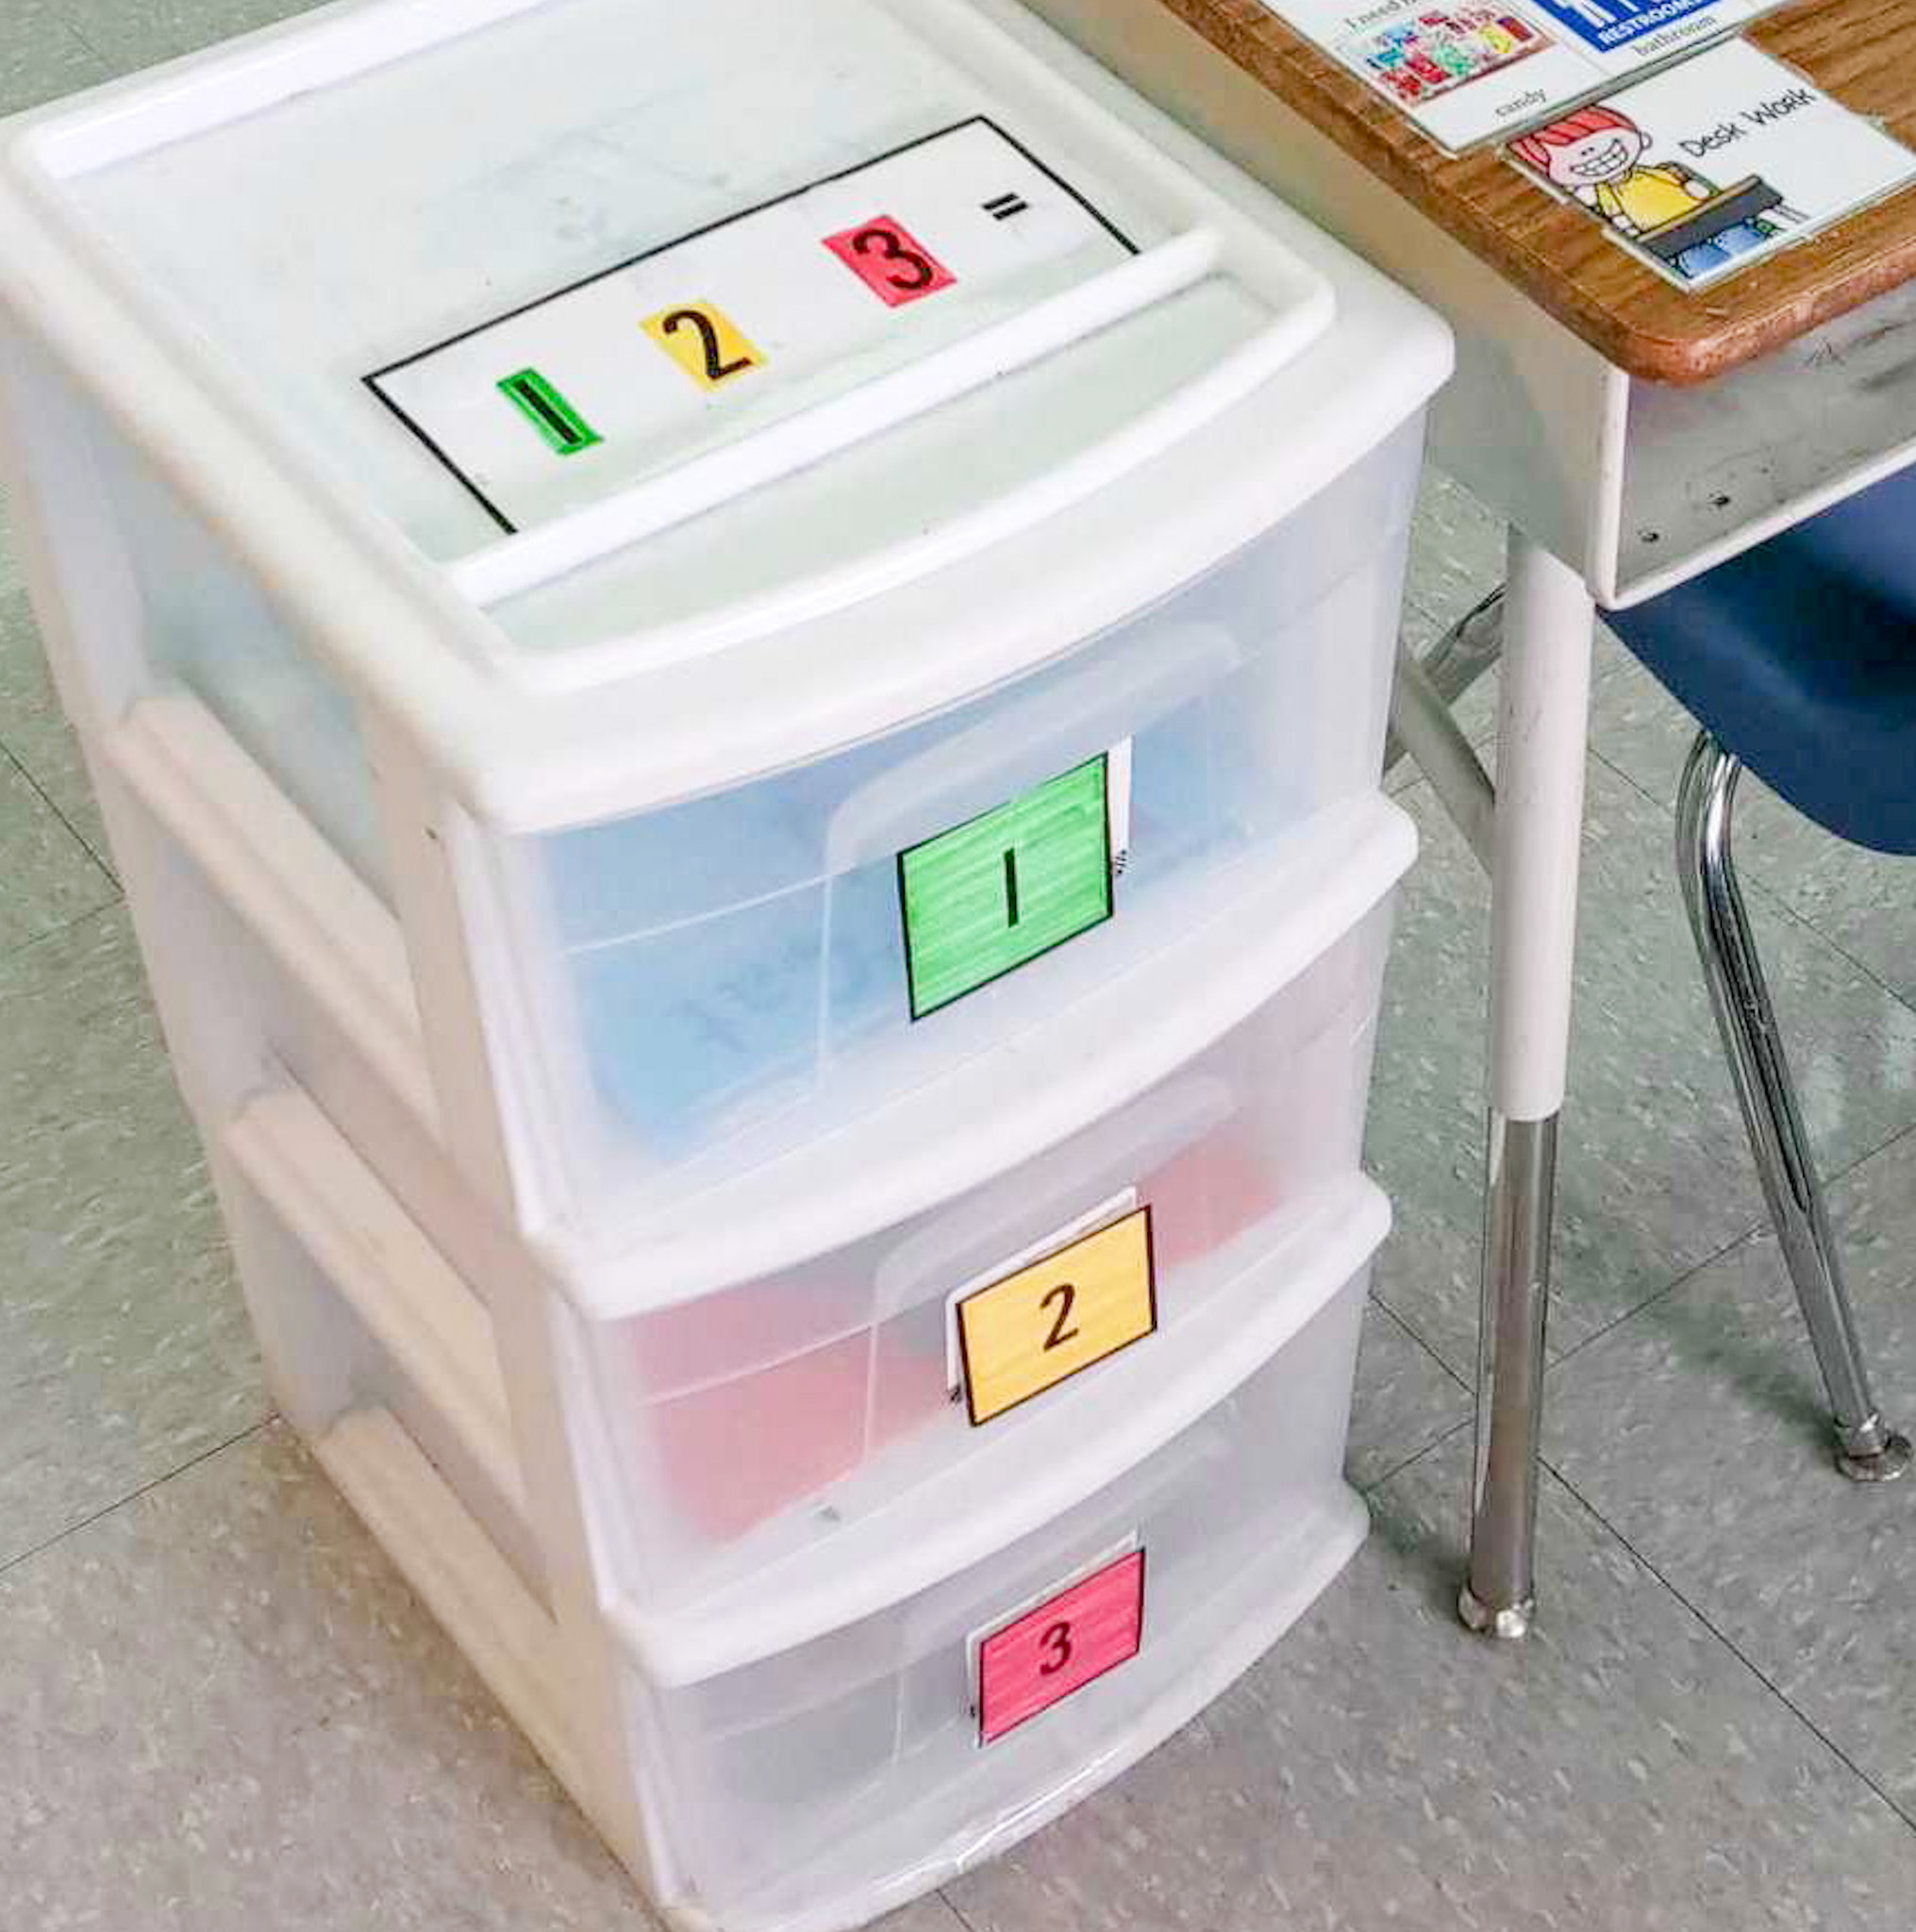 Example of 3 Drawer Work System Visuals